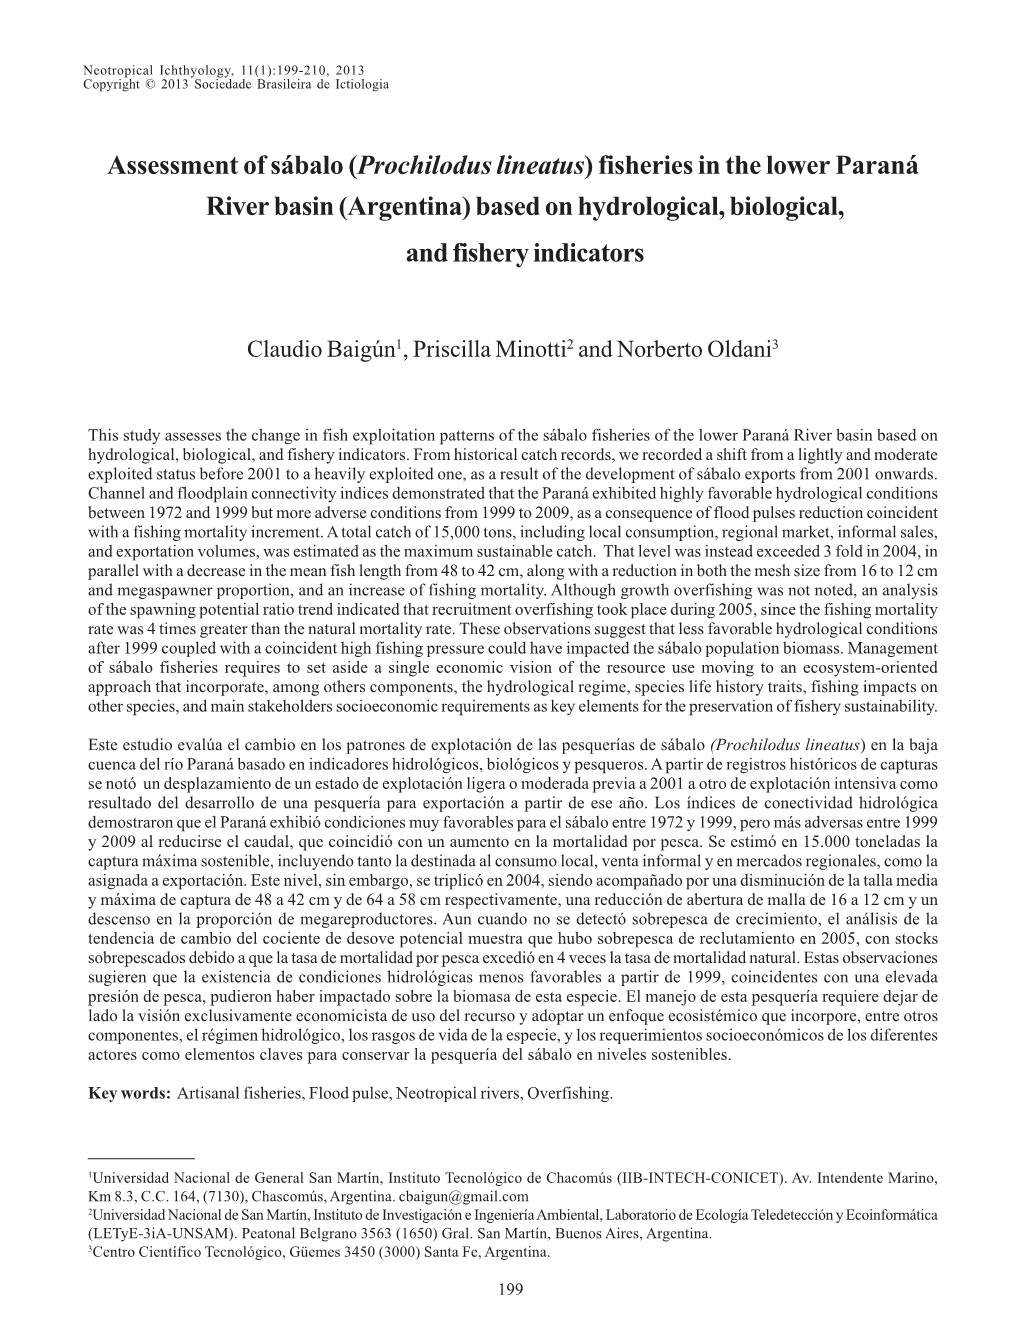 (Prochilodus Lineatus) Fisheries in the Lower Paraná River Basin (Argentina) Based on Hydrological, Biological, and Fishery Indicators